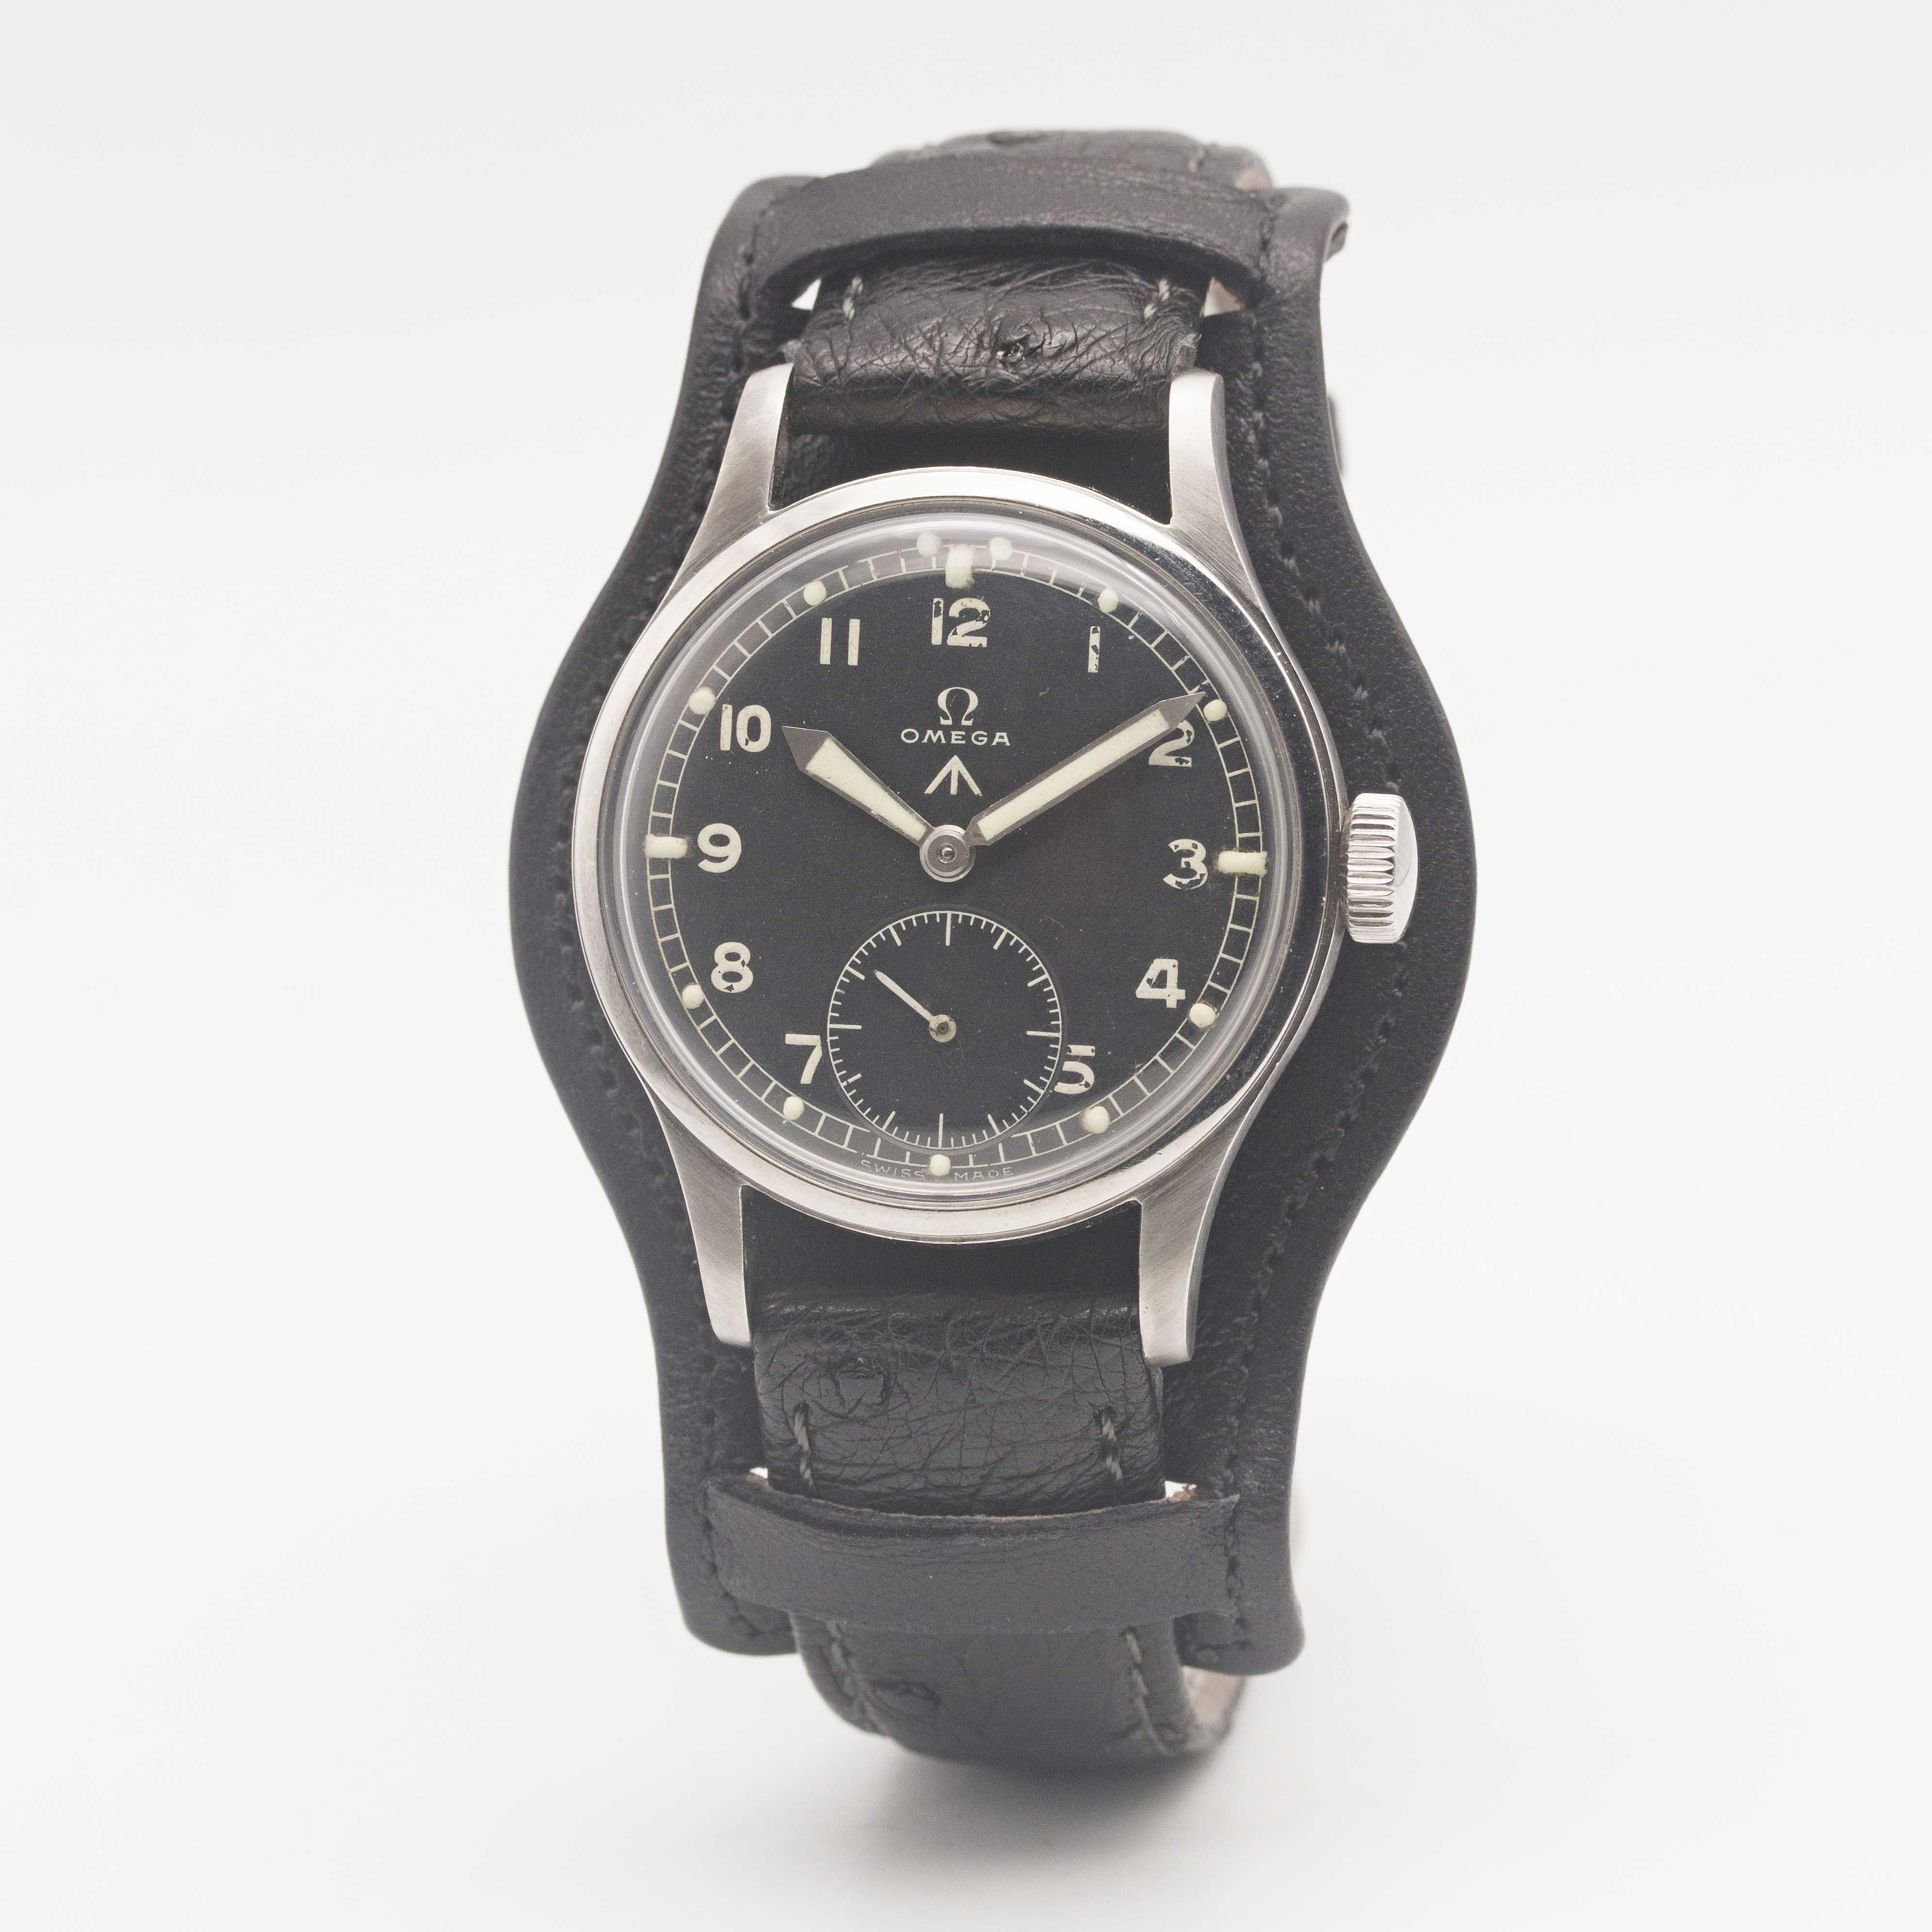 A GENTLEMAN'S STAINLESS STEEL BRITISH MILITARY OMEGA W.W.W. WRIST WATCH CIRCA 1945, PART OF THE " - Image 4 of 9